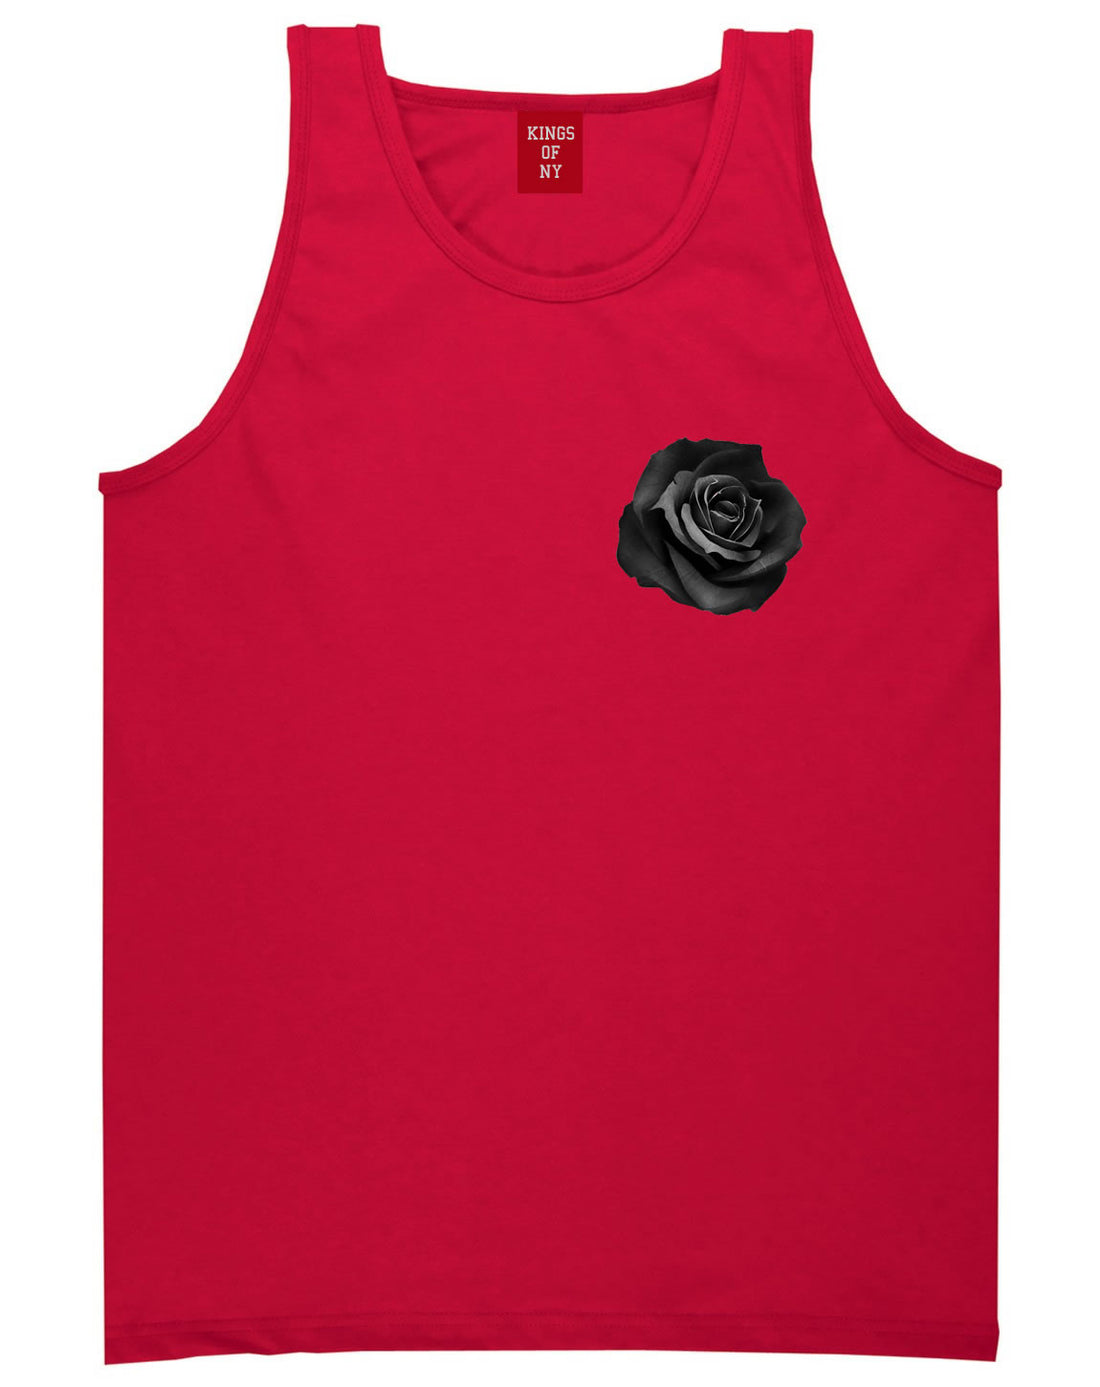 Black Noir Rose Flower Chest Logo Tank Top in Red By Kings Of NY